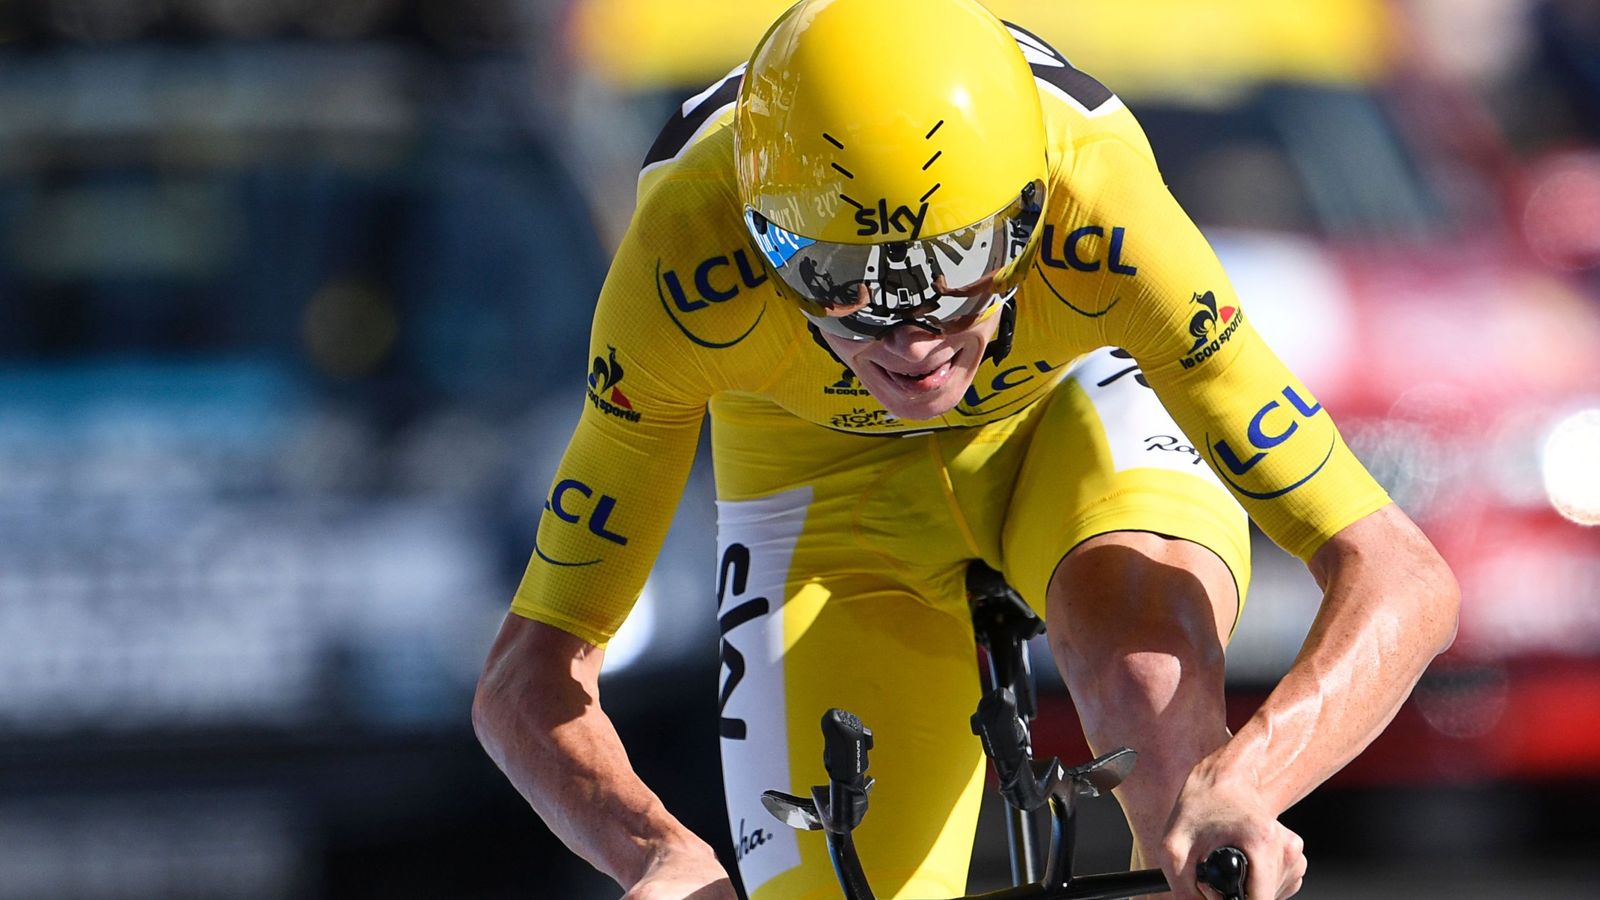 Tour de France Chris Froome extends lead by winning stage 18 Cycling